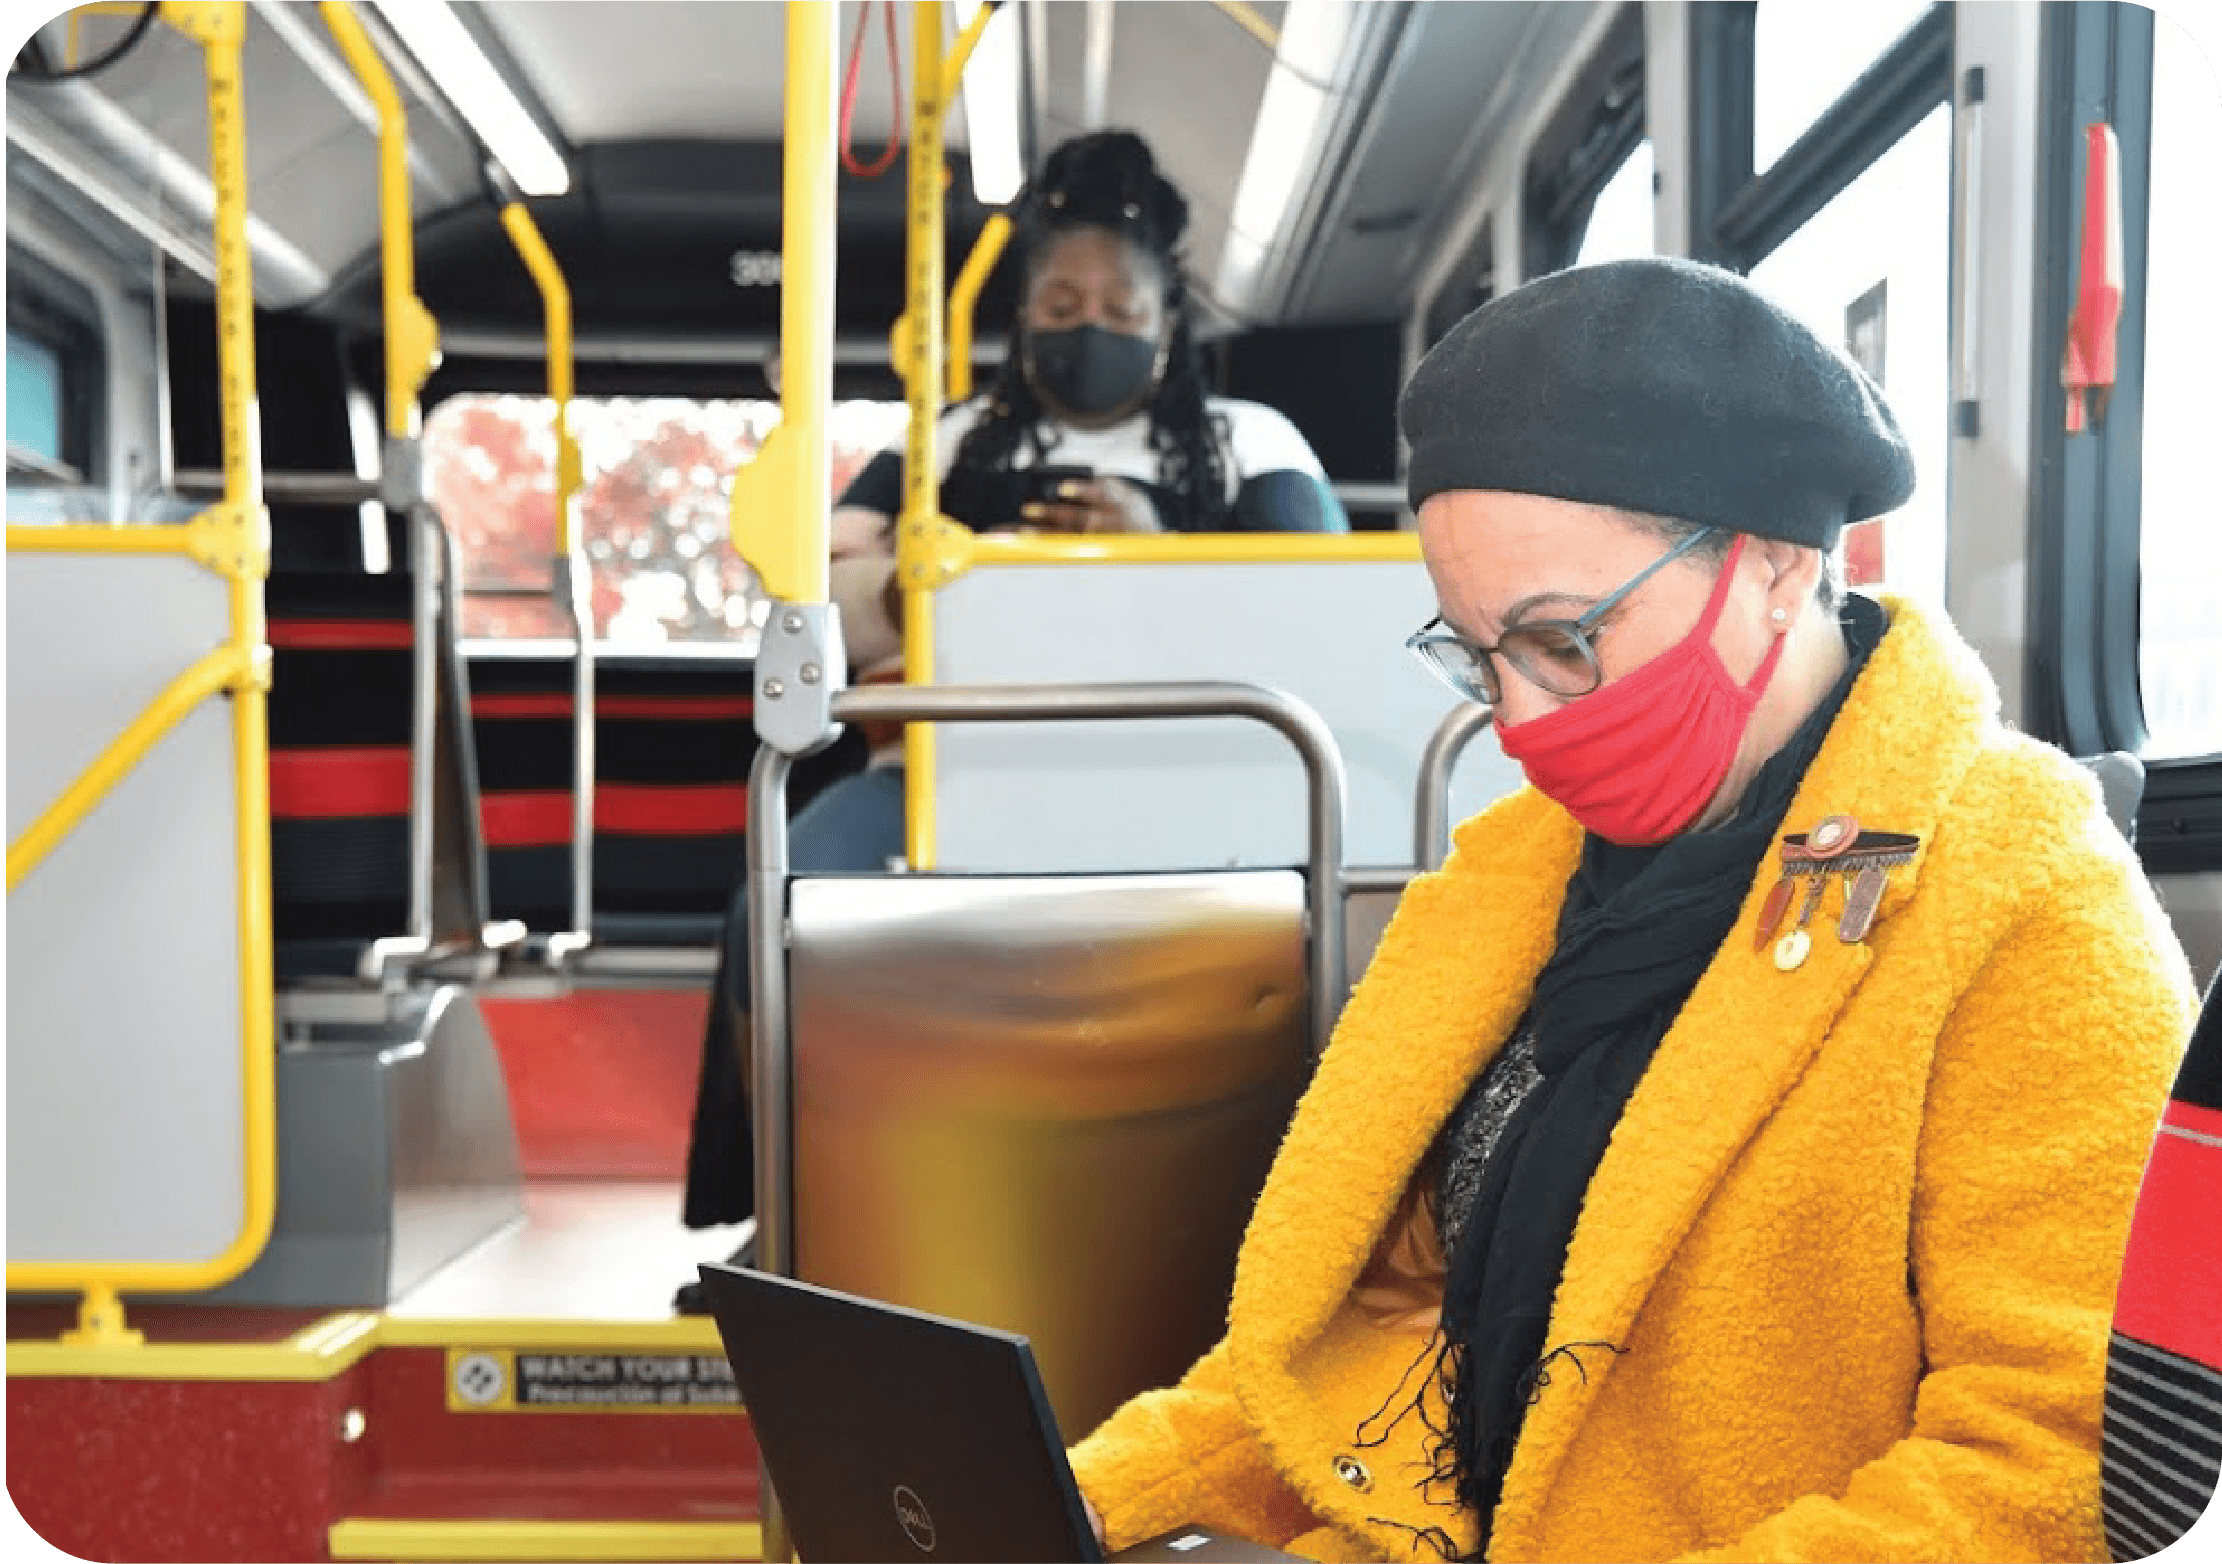 Free Wi-Fi and USB Chargers on board of the DC Circulator buses